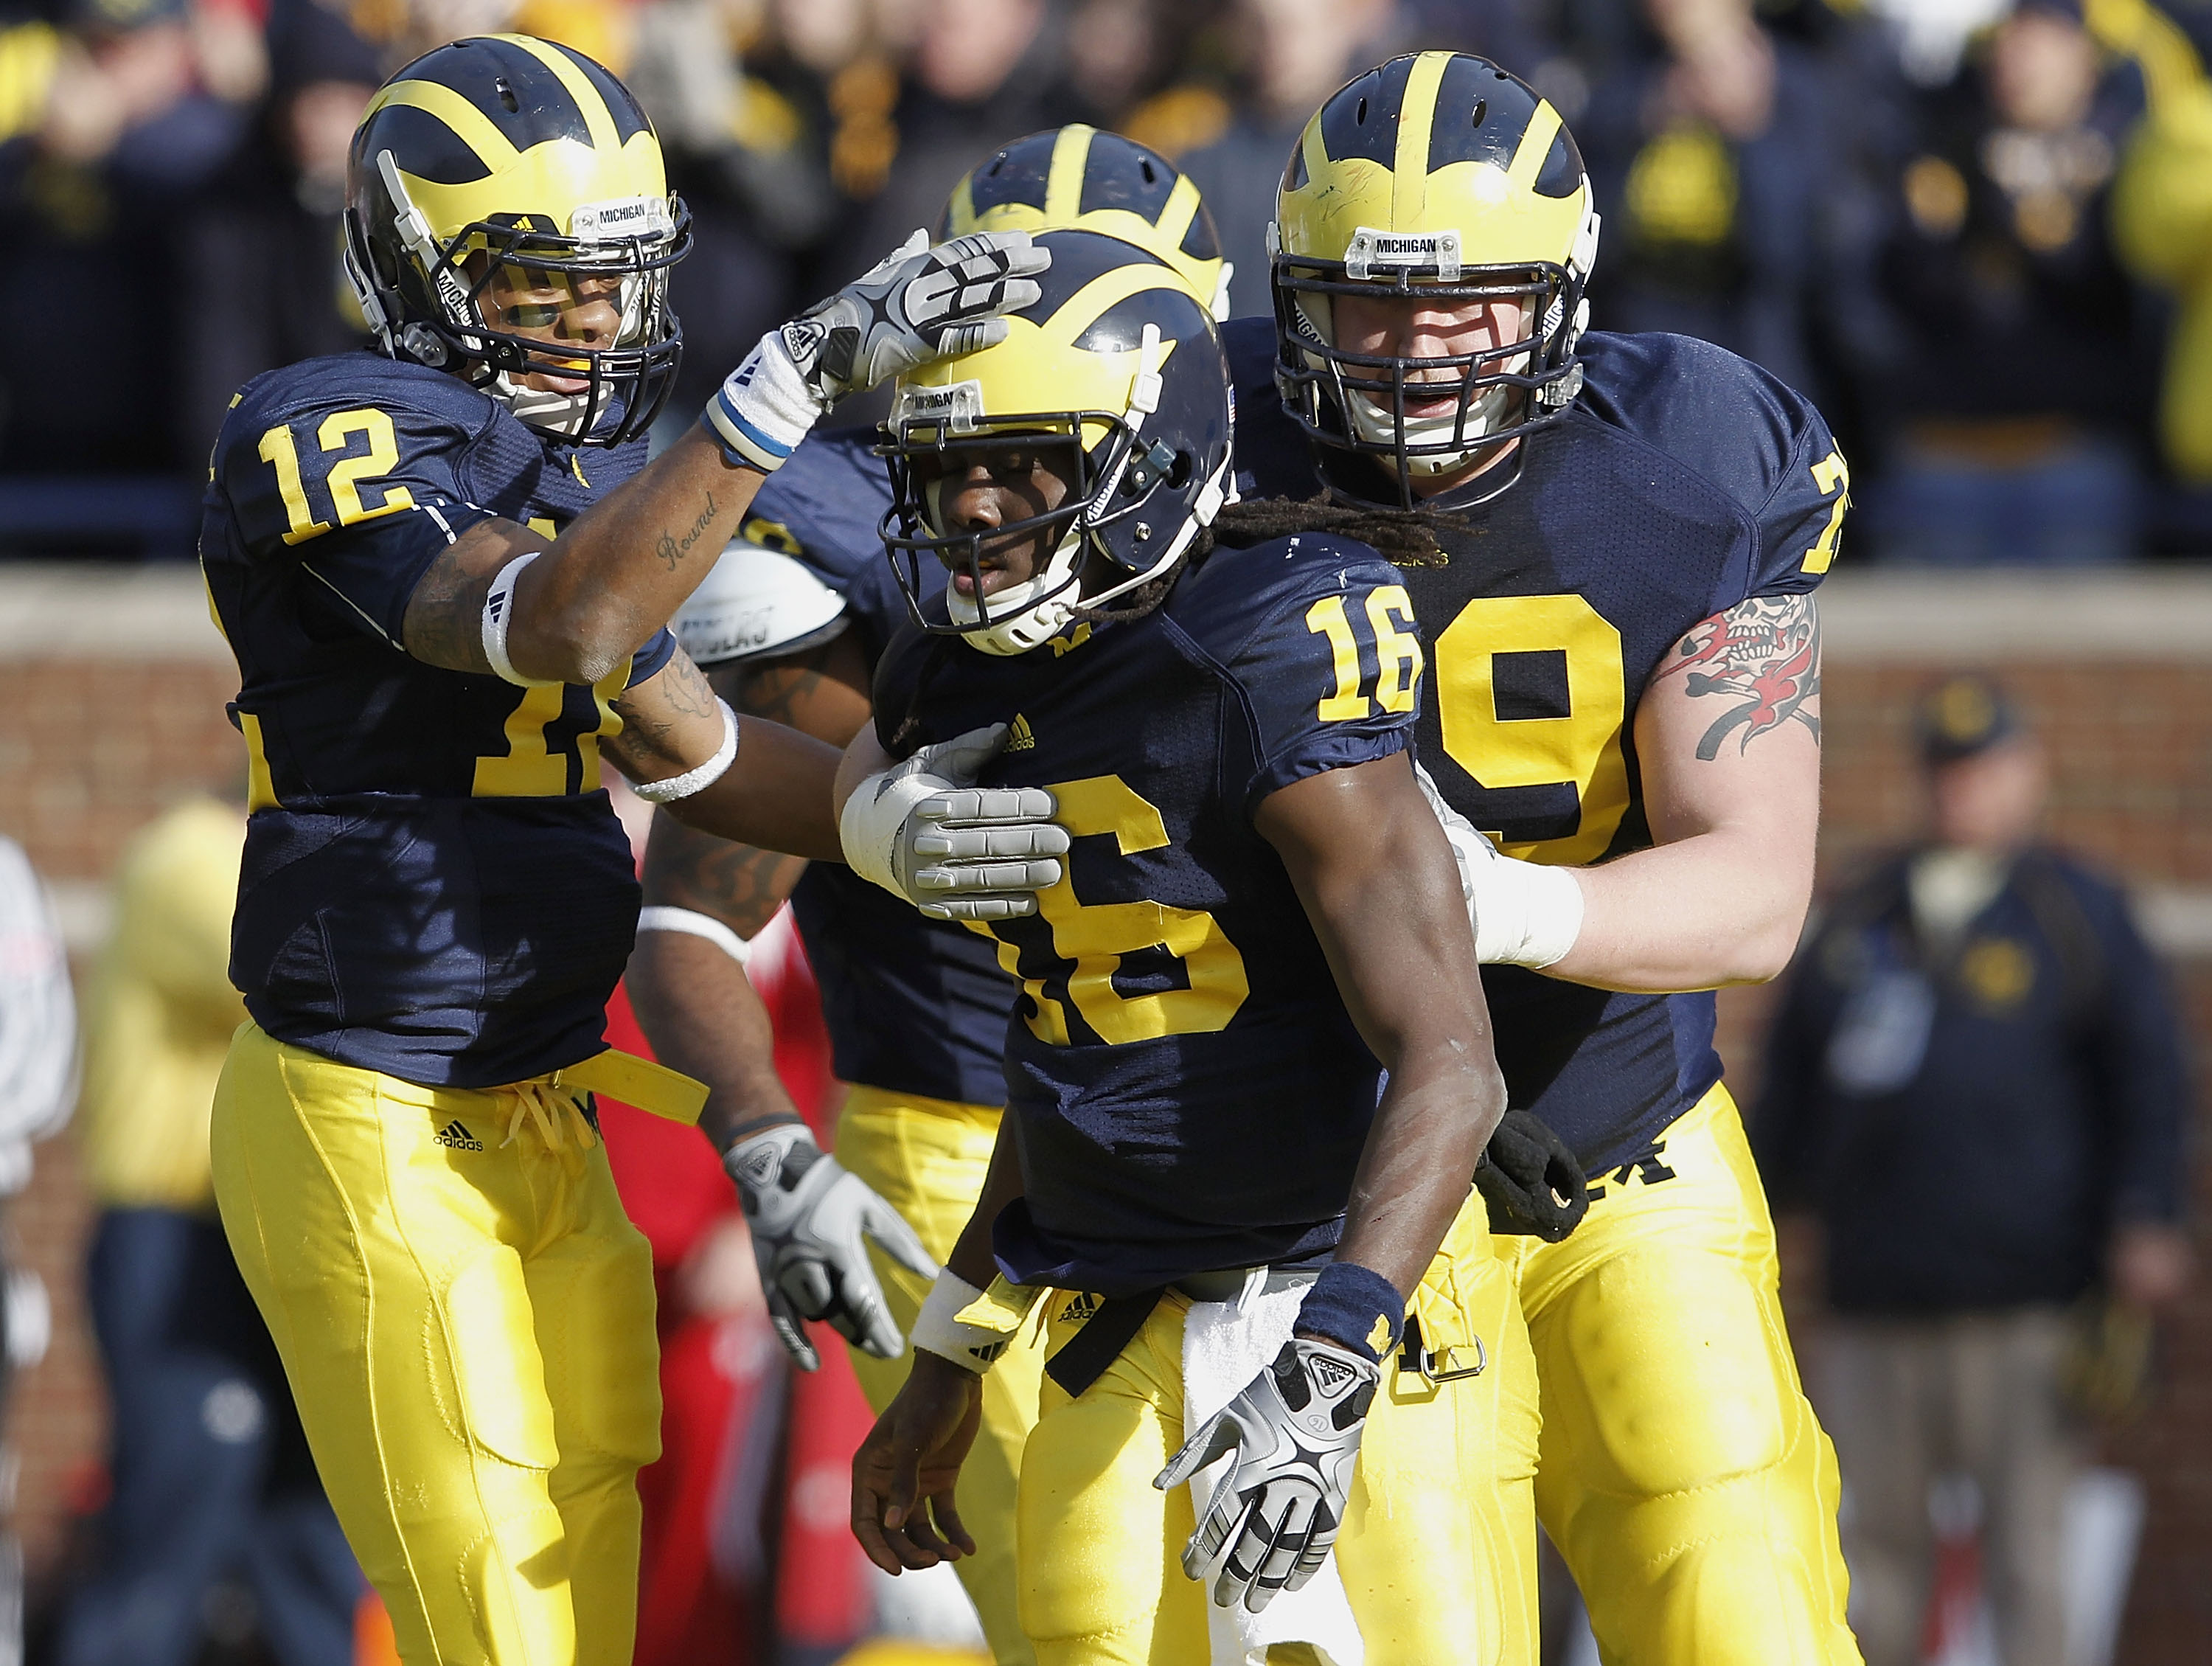 ANN ARBOR, MI - NOVEMBER 20:  Denard Robinson #16 of the Michigan Wolverines is congratulated by Roy Roundtree #12 and Perry Dorrenstein #79 after a third quarter touchdown against the Wisconsin Badgers at Michigan Stadium on November 20, 2010 in Ann Arbo